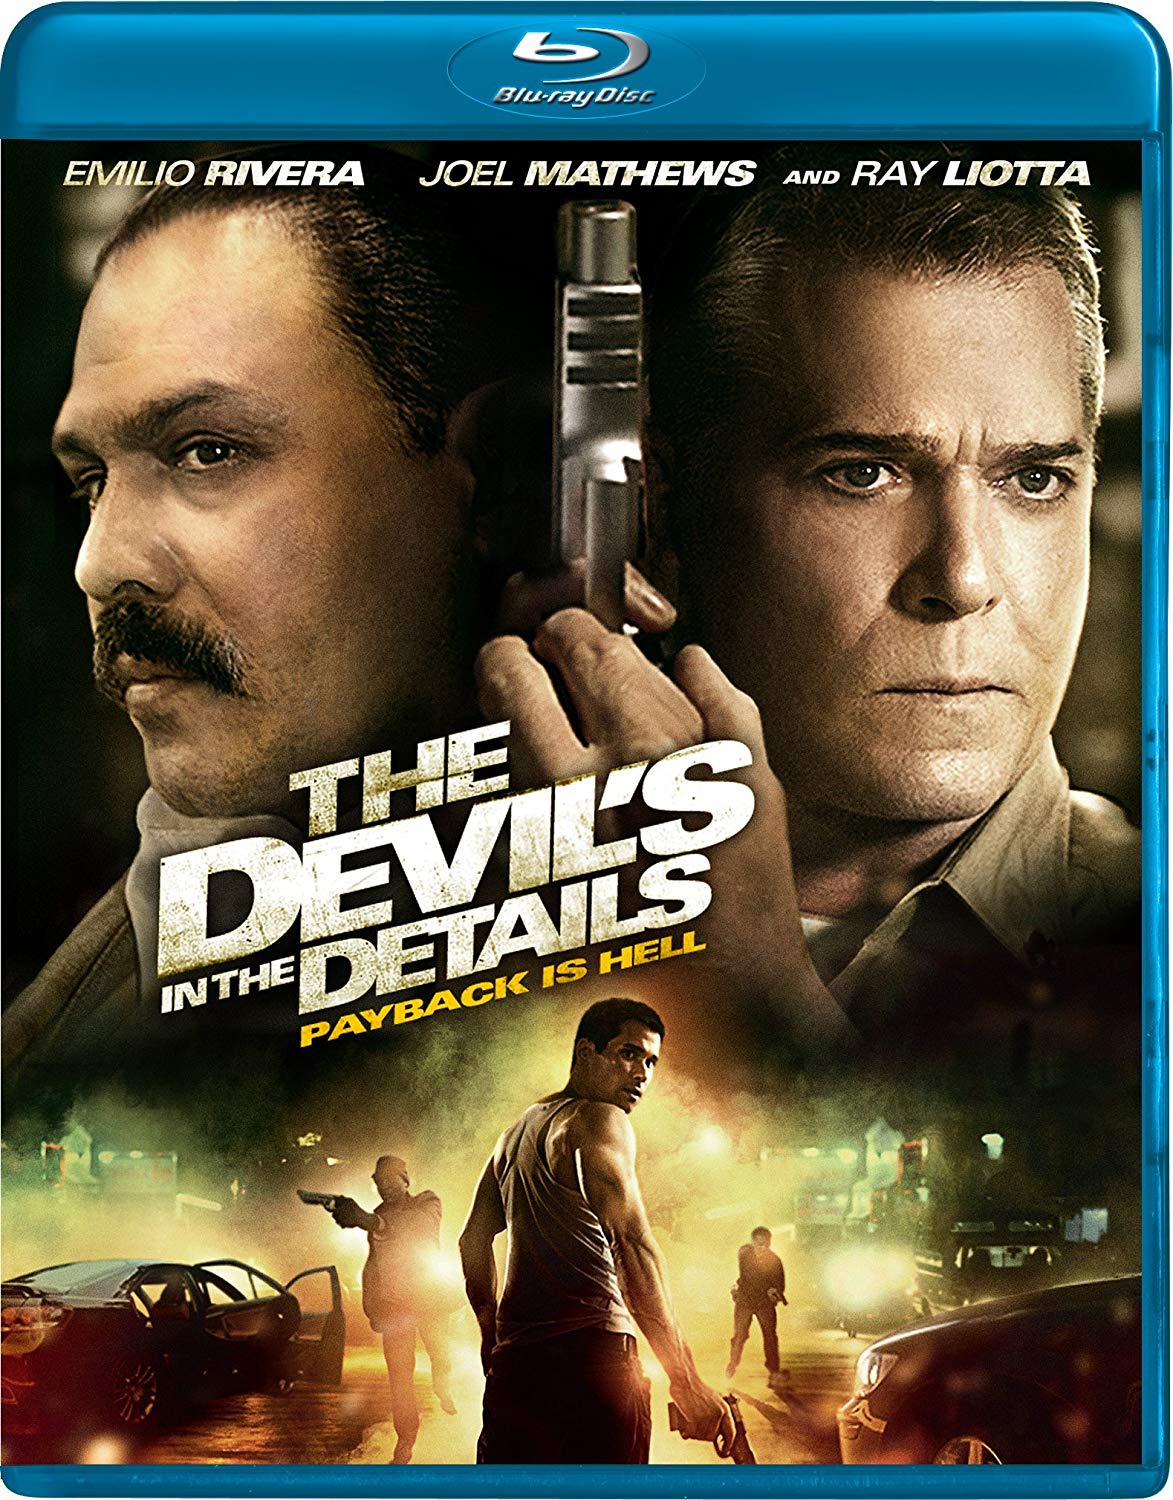 The Devil's in the Details Blu-ray